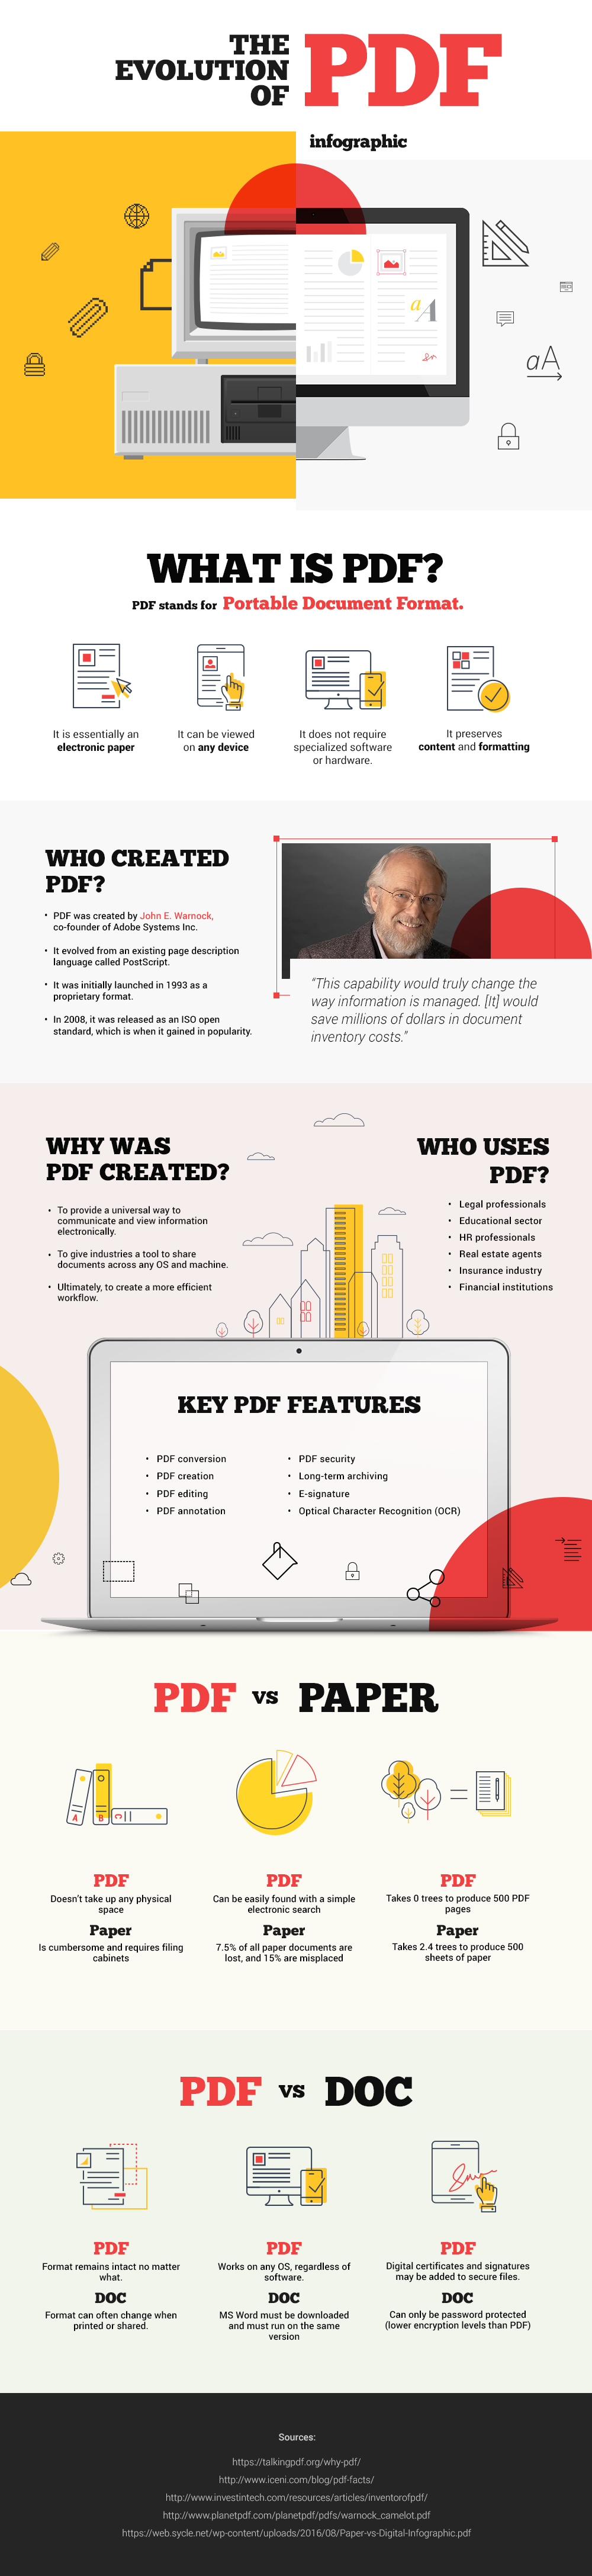 Infographic The Evolution of PDF A Brief History